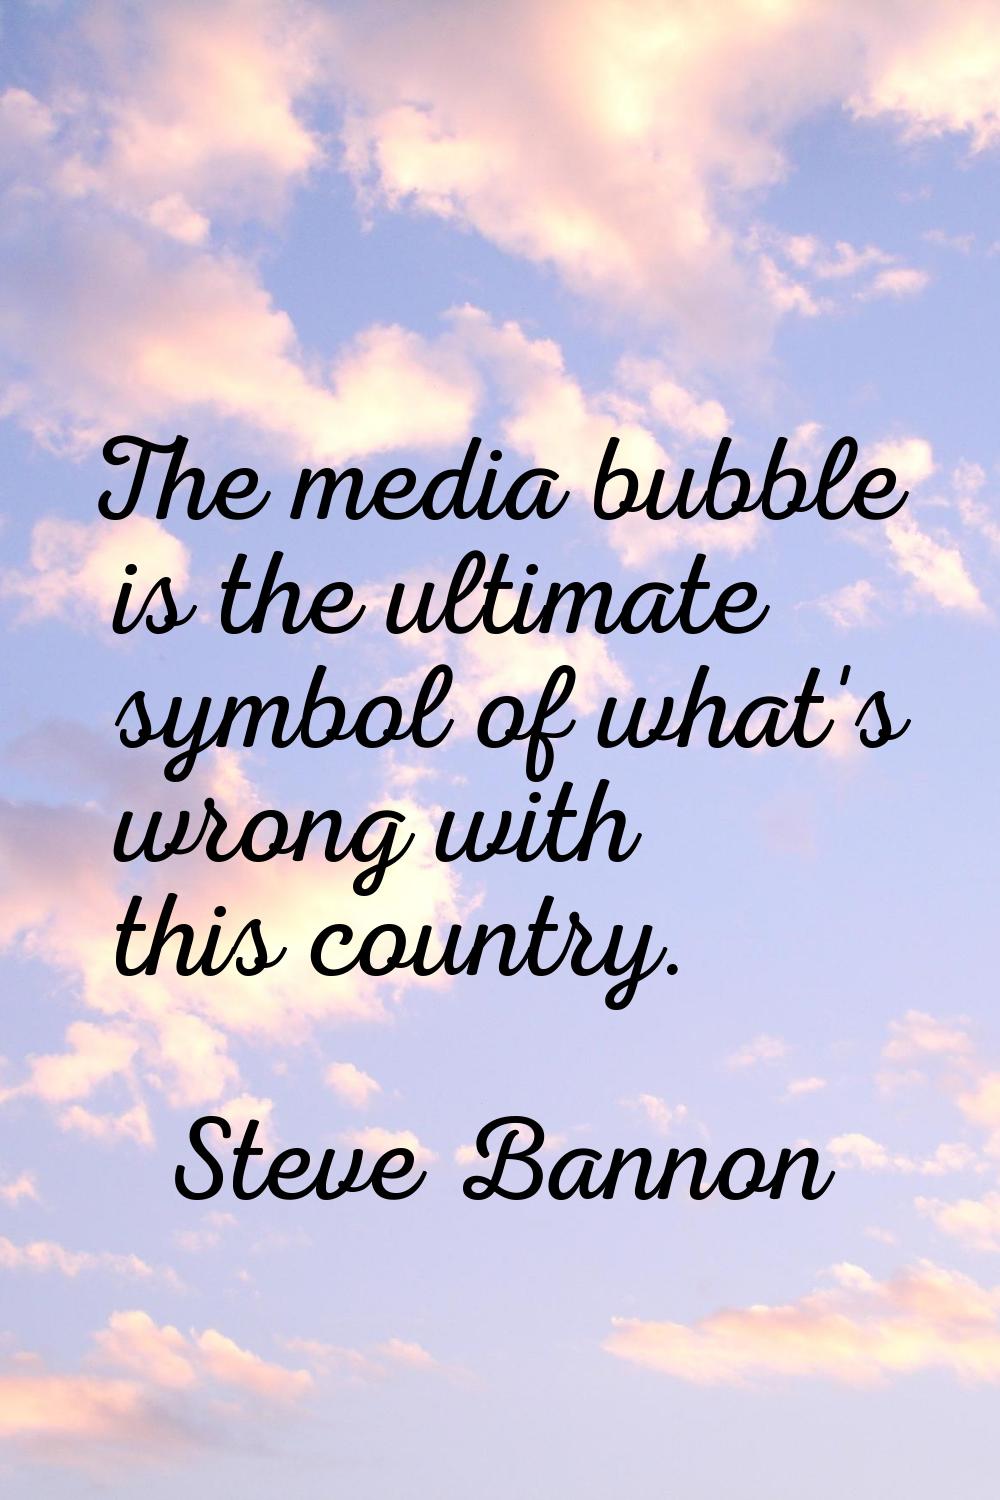 The media bubble is the ultimate symbol of what's wrong with this country.